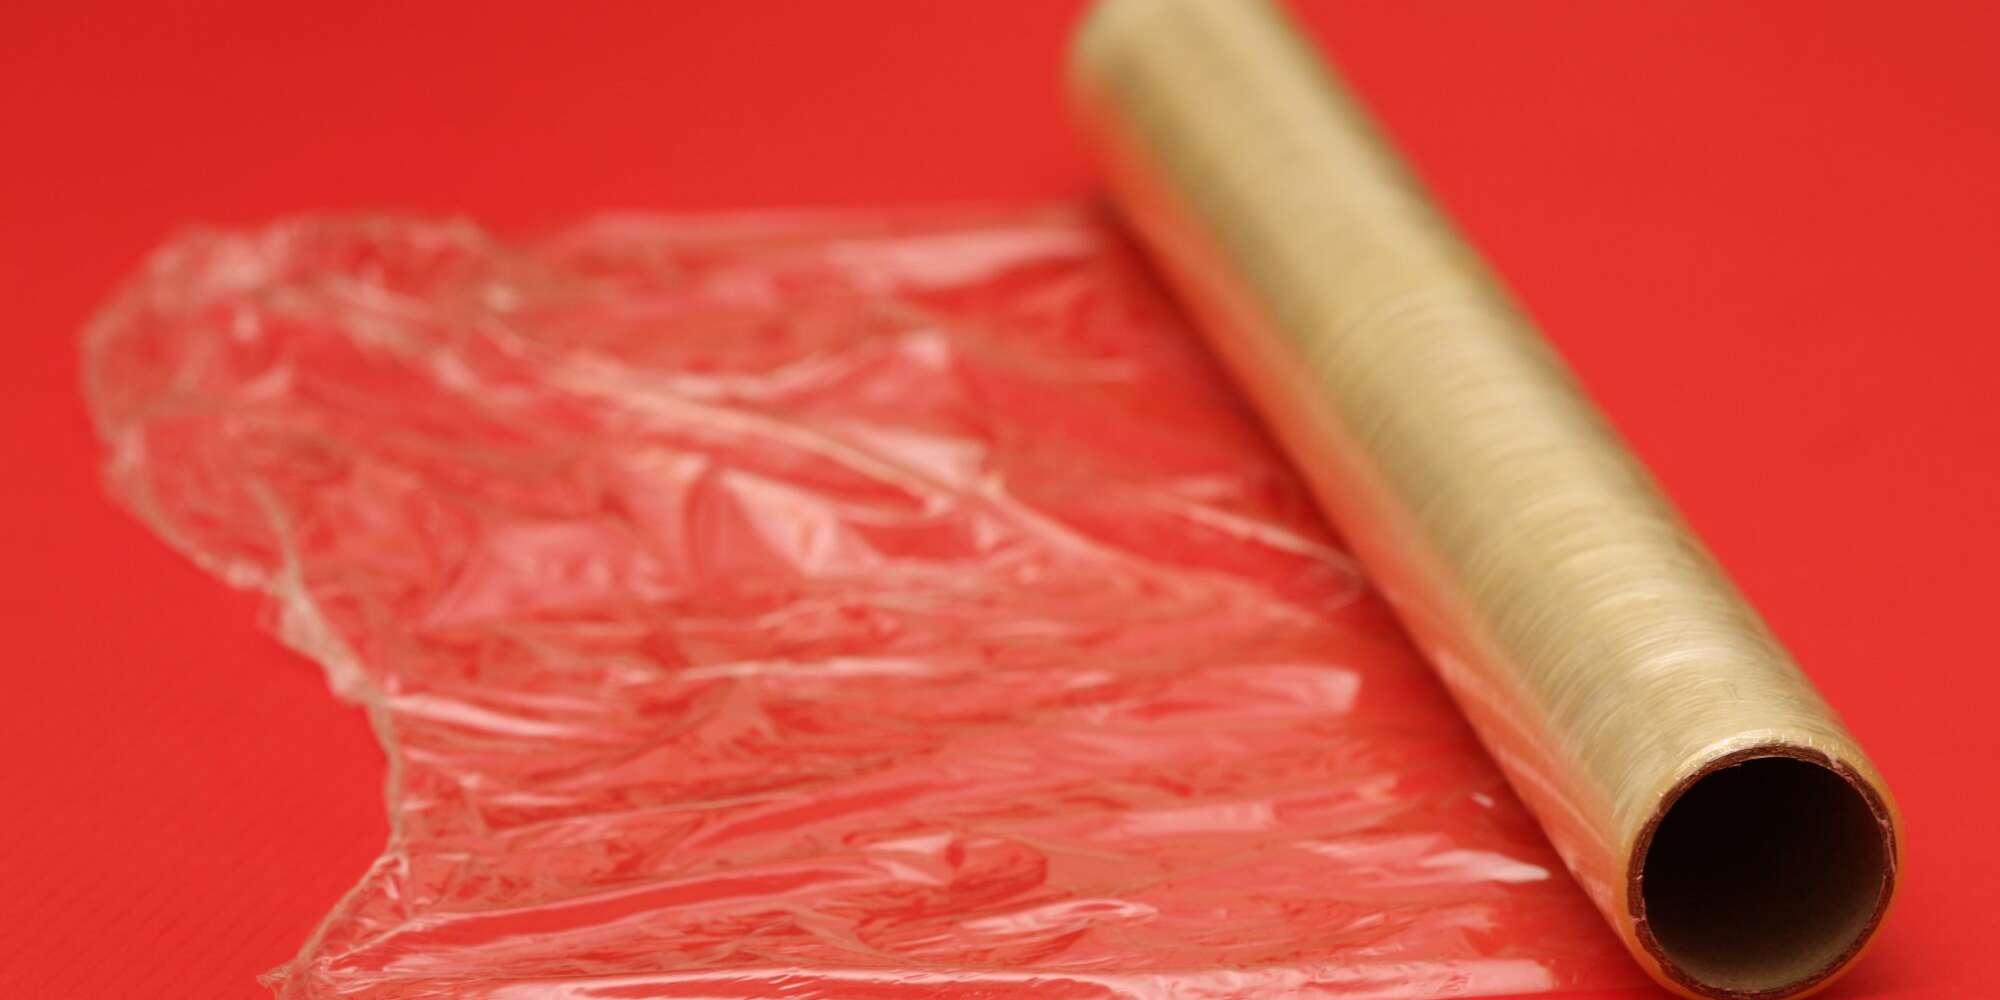 A Note About Cling Film